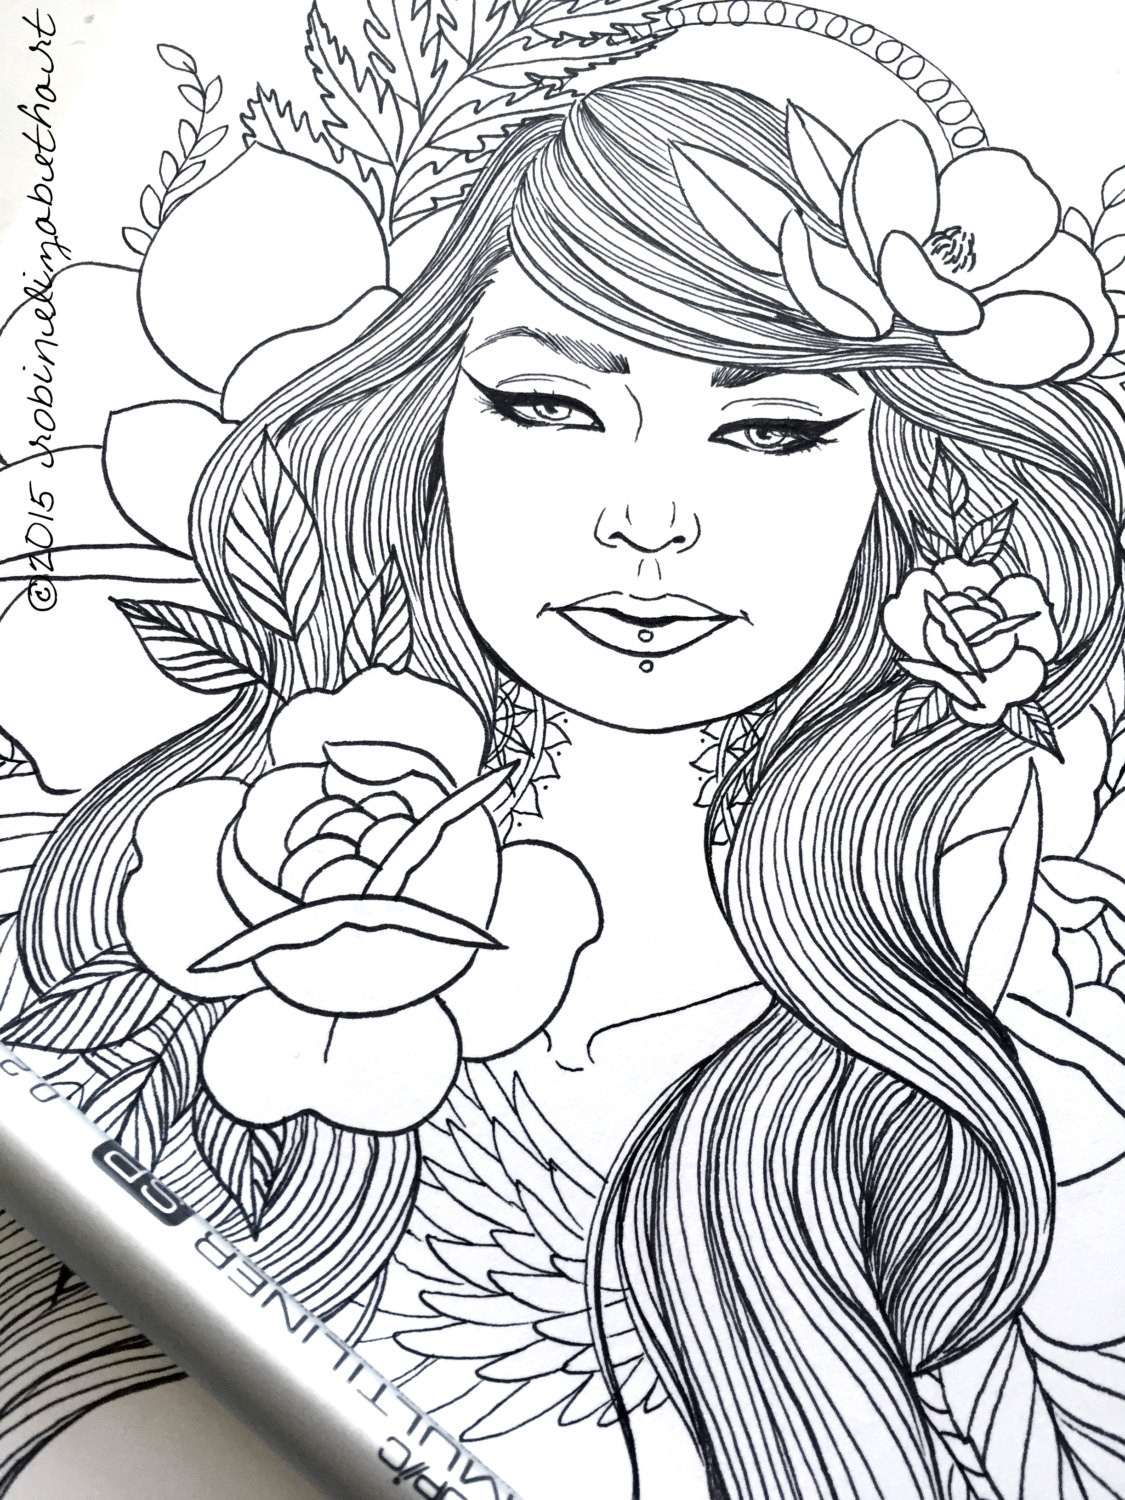 Coloring Book Pages For Girls
 Girls with Tattoos Pack Adult Coloring Pages Magnolias